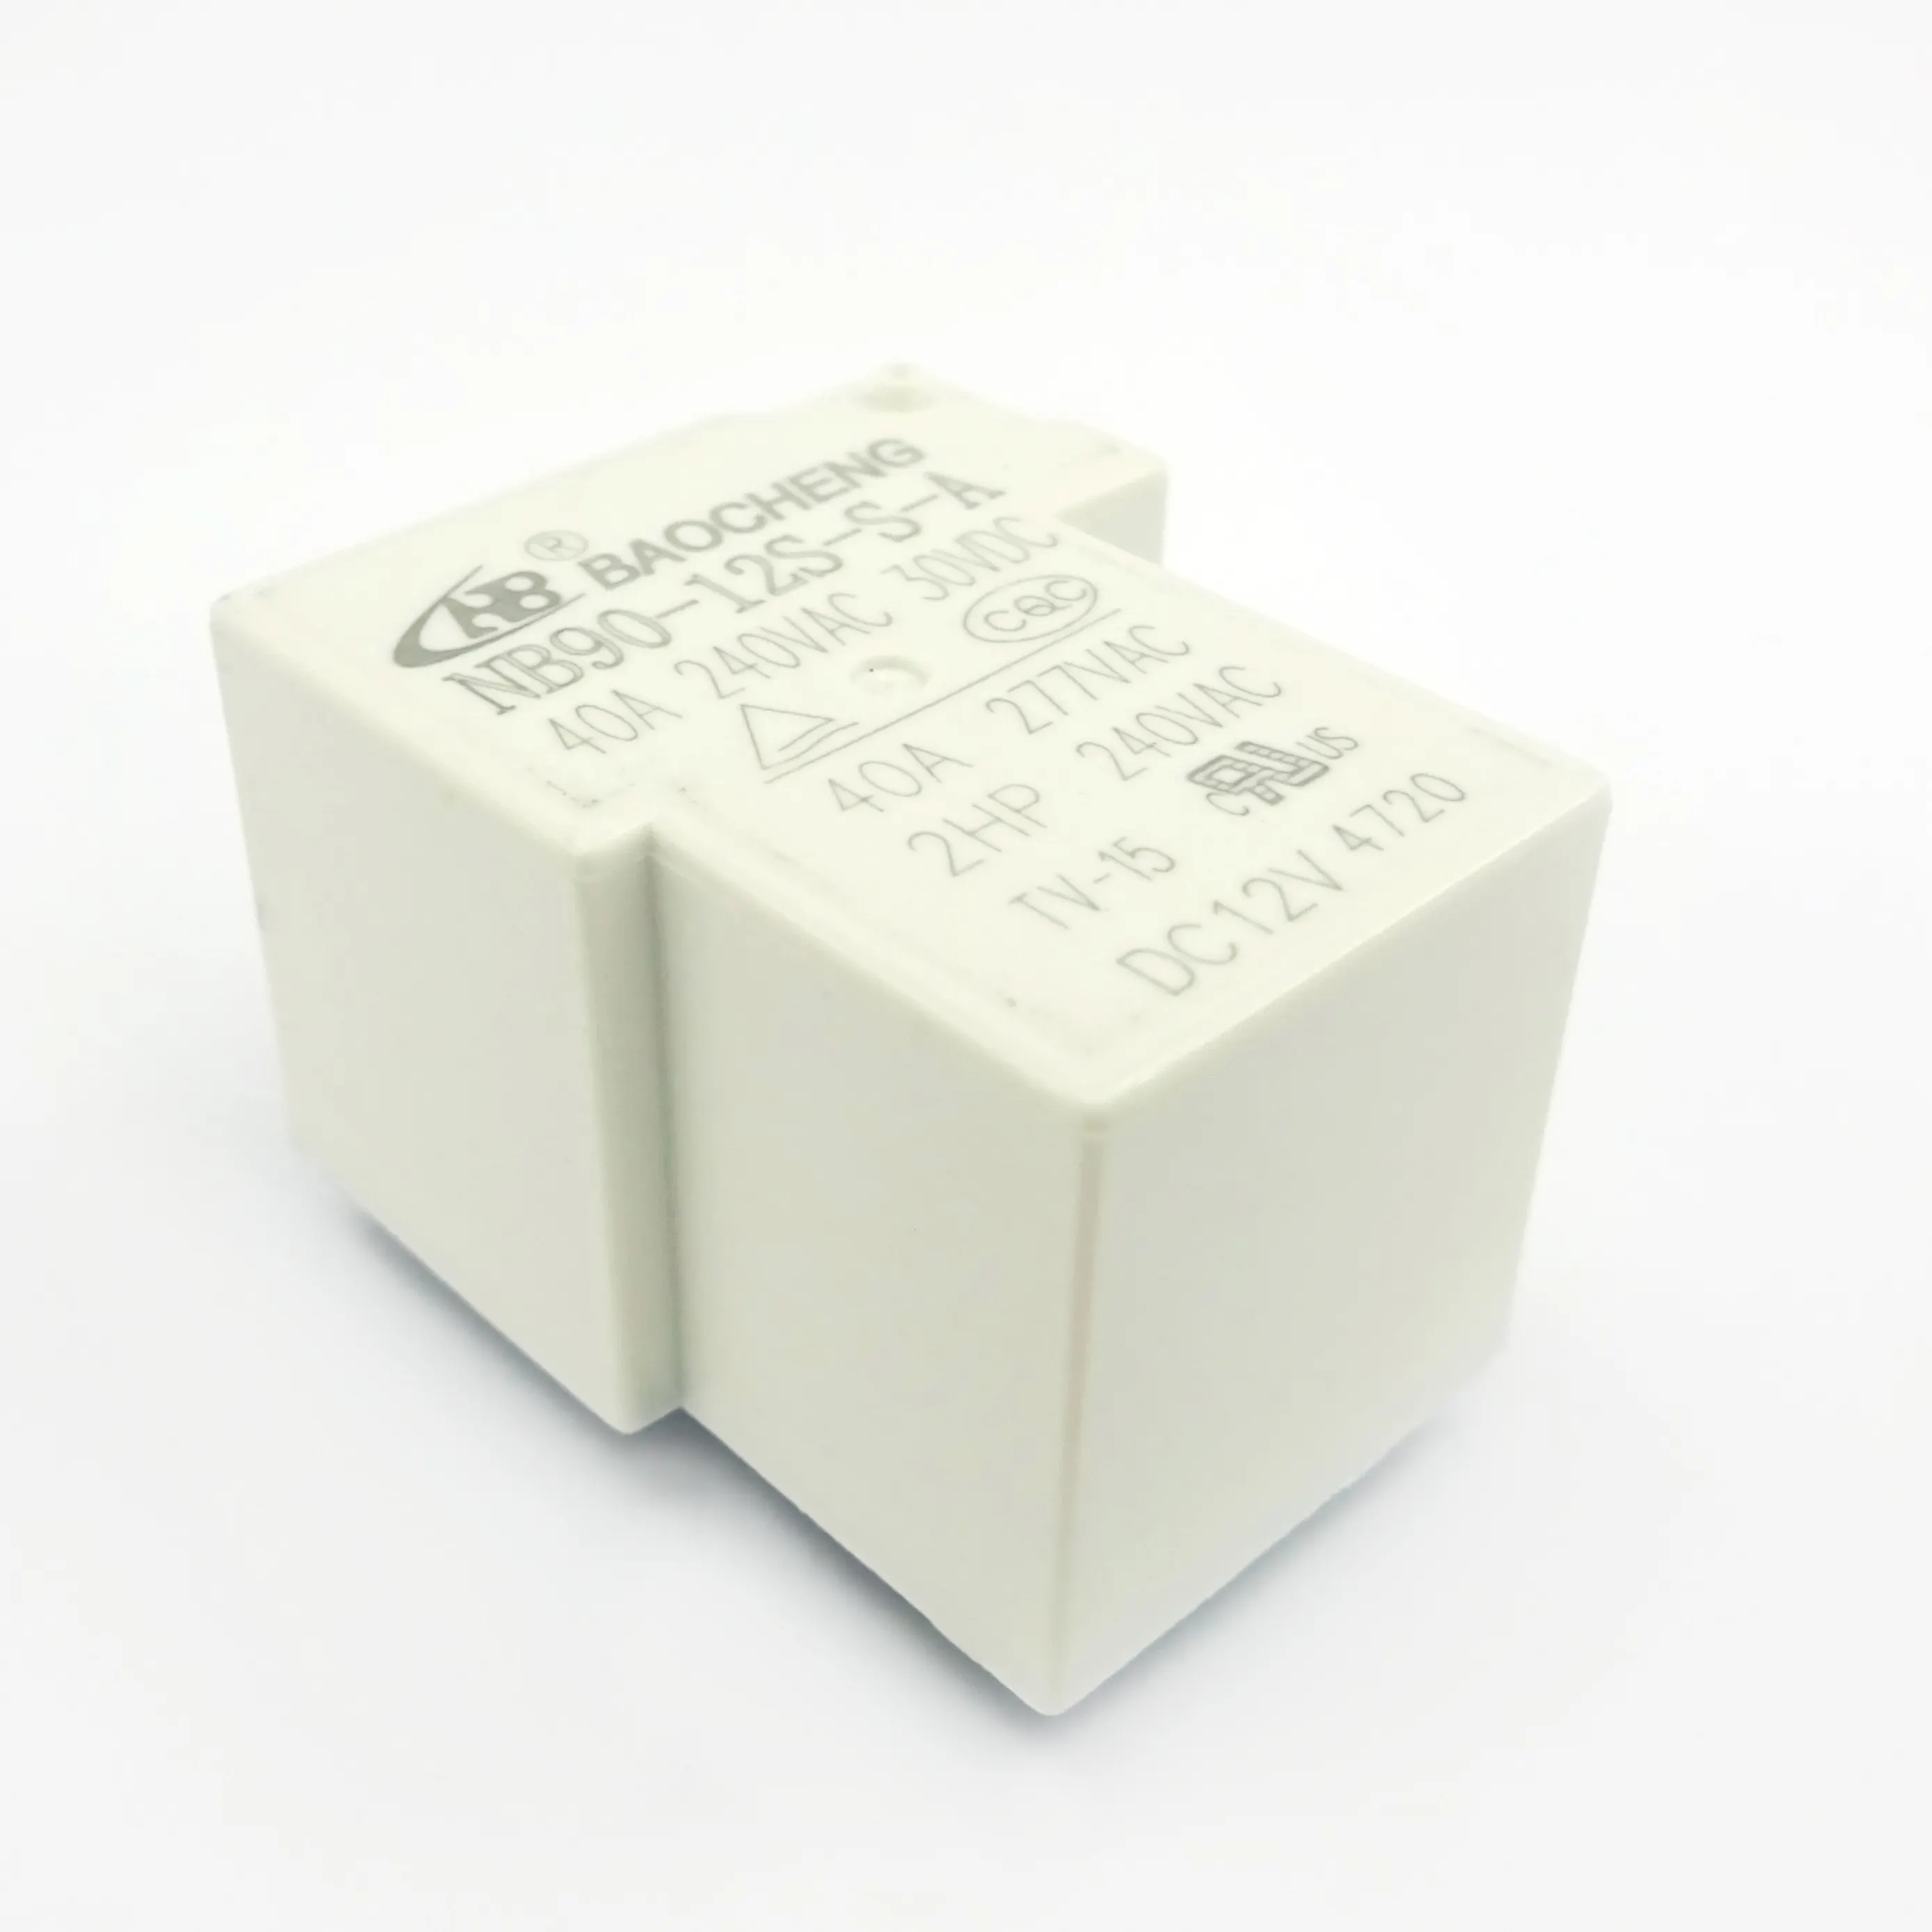 Brand new Original in stock hot sale chip Relays Power relay Through Hole NB90-12S-S-A 40A integrated circuit